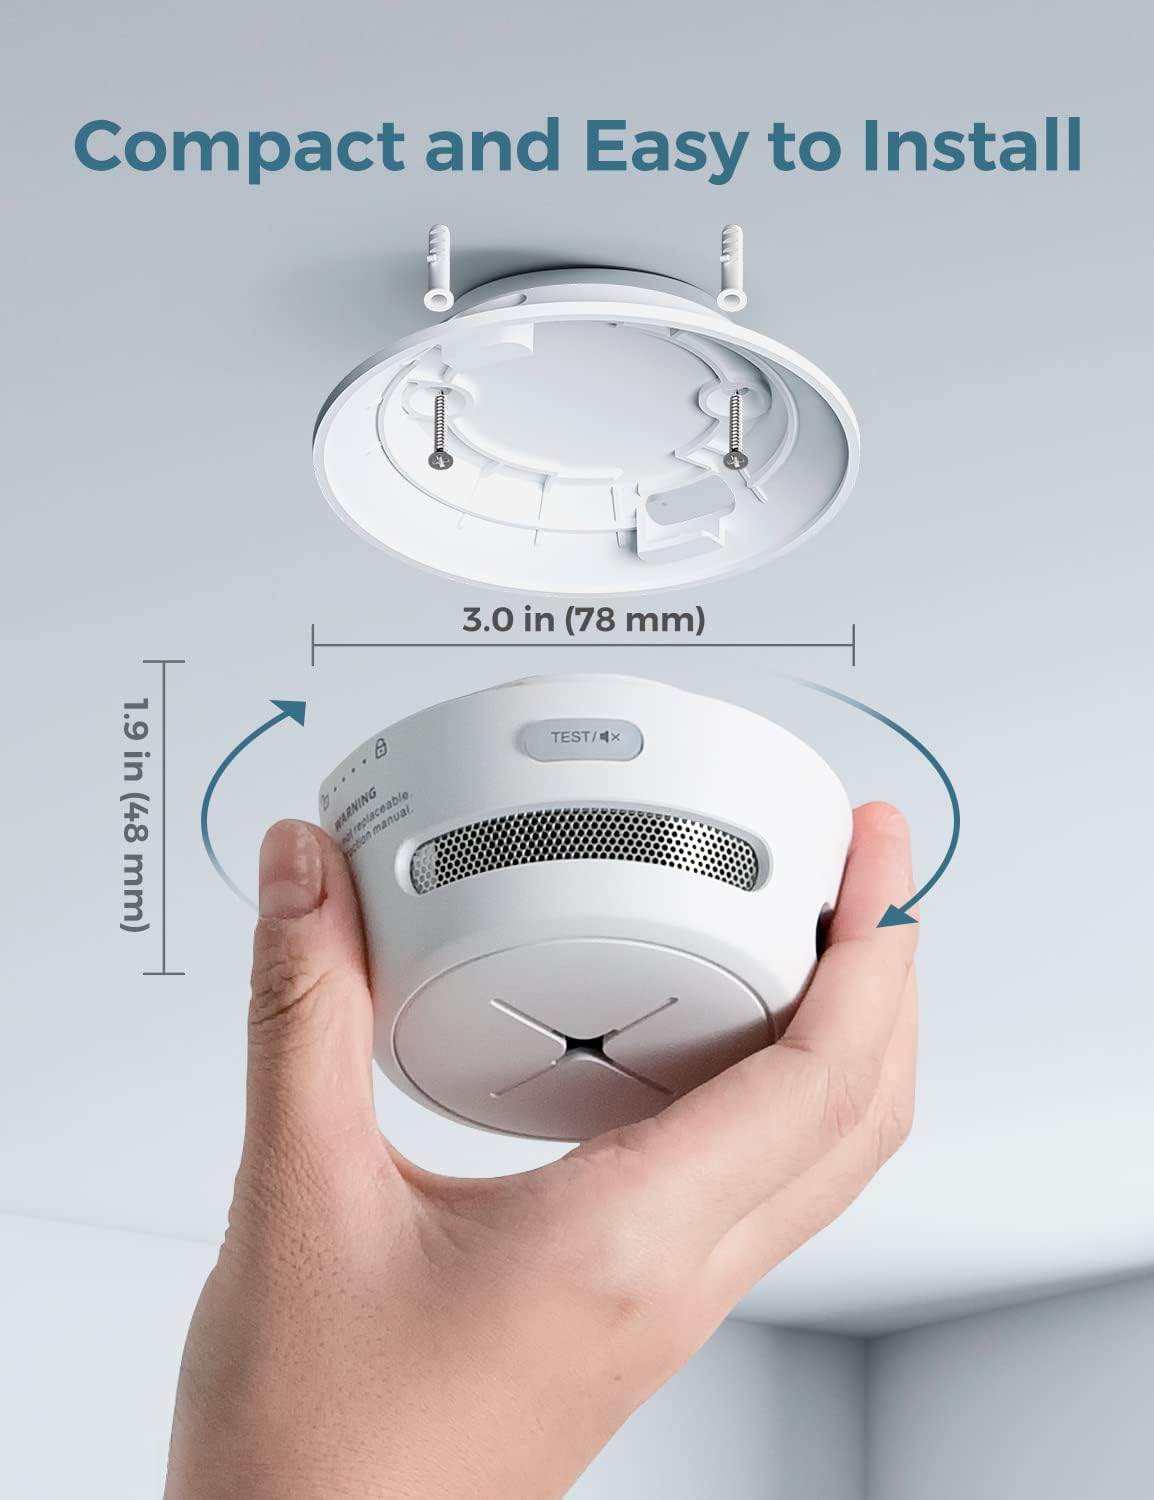 AEGISLINK Smoke Detector 10-Year Battery with Test/Silence Button,  Fire Alarm with Photoelectric Sensor, Low Battery Warning, S500 (Inde